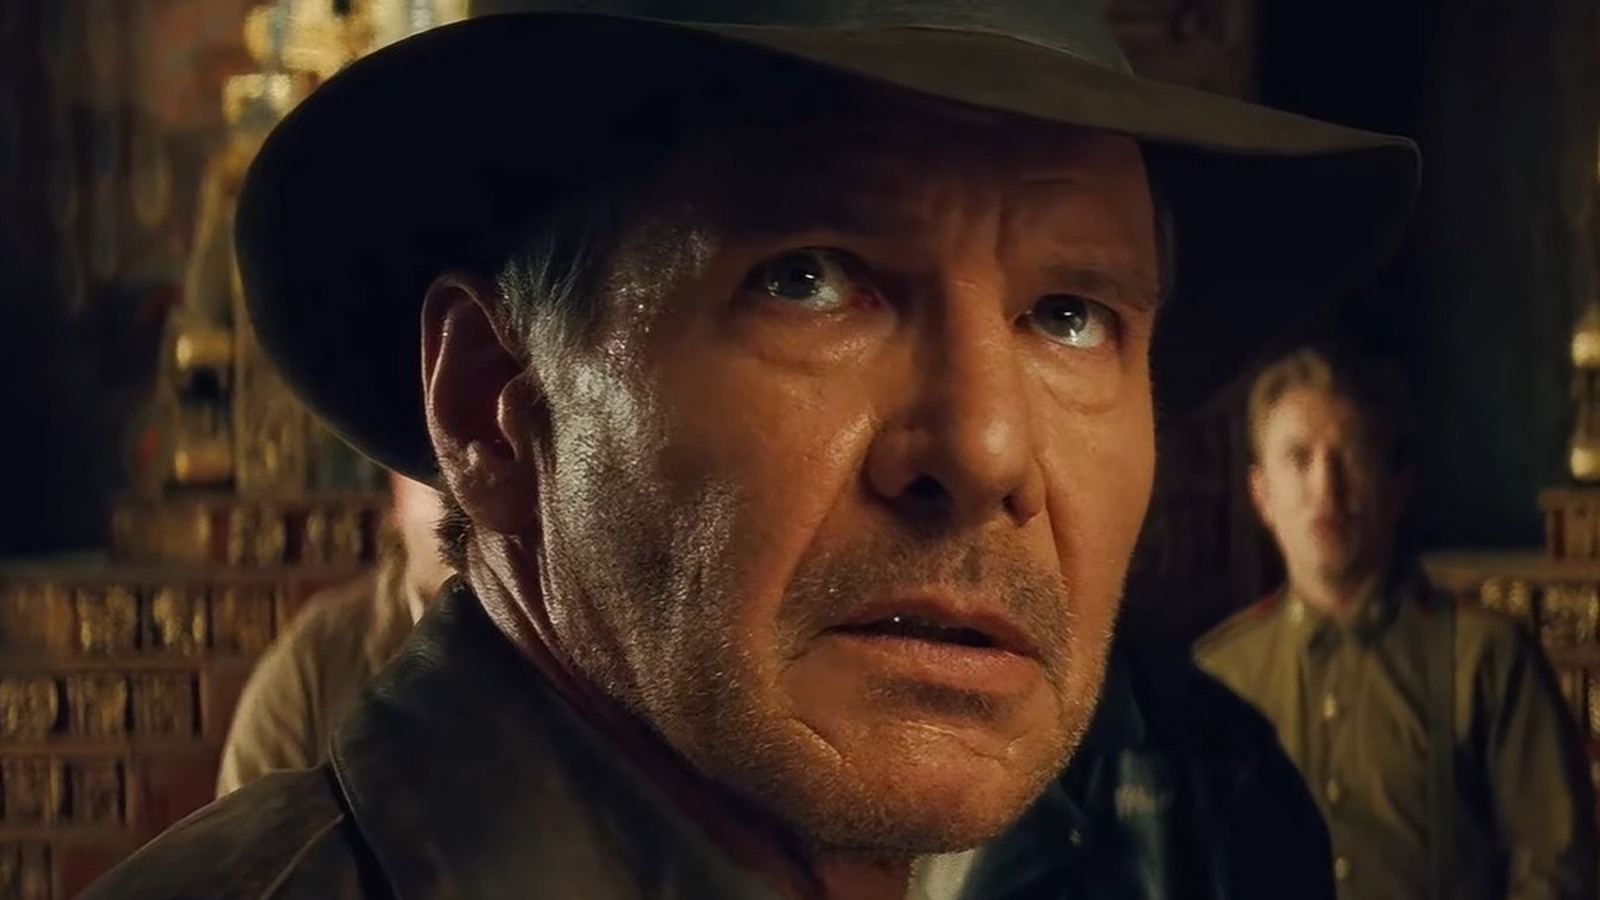 Indiana Jones and the Kingdom of the Crystal Skull movie review (2008)